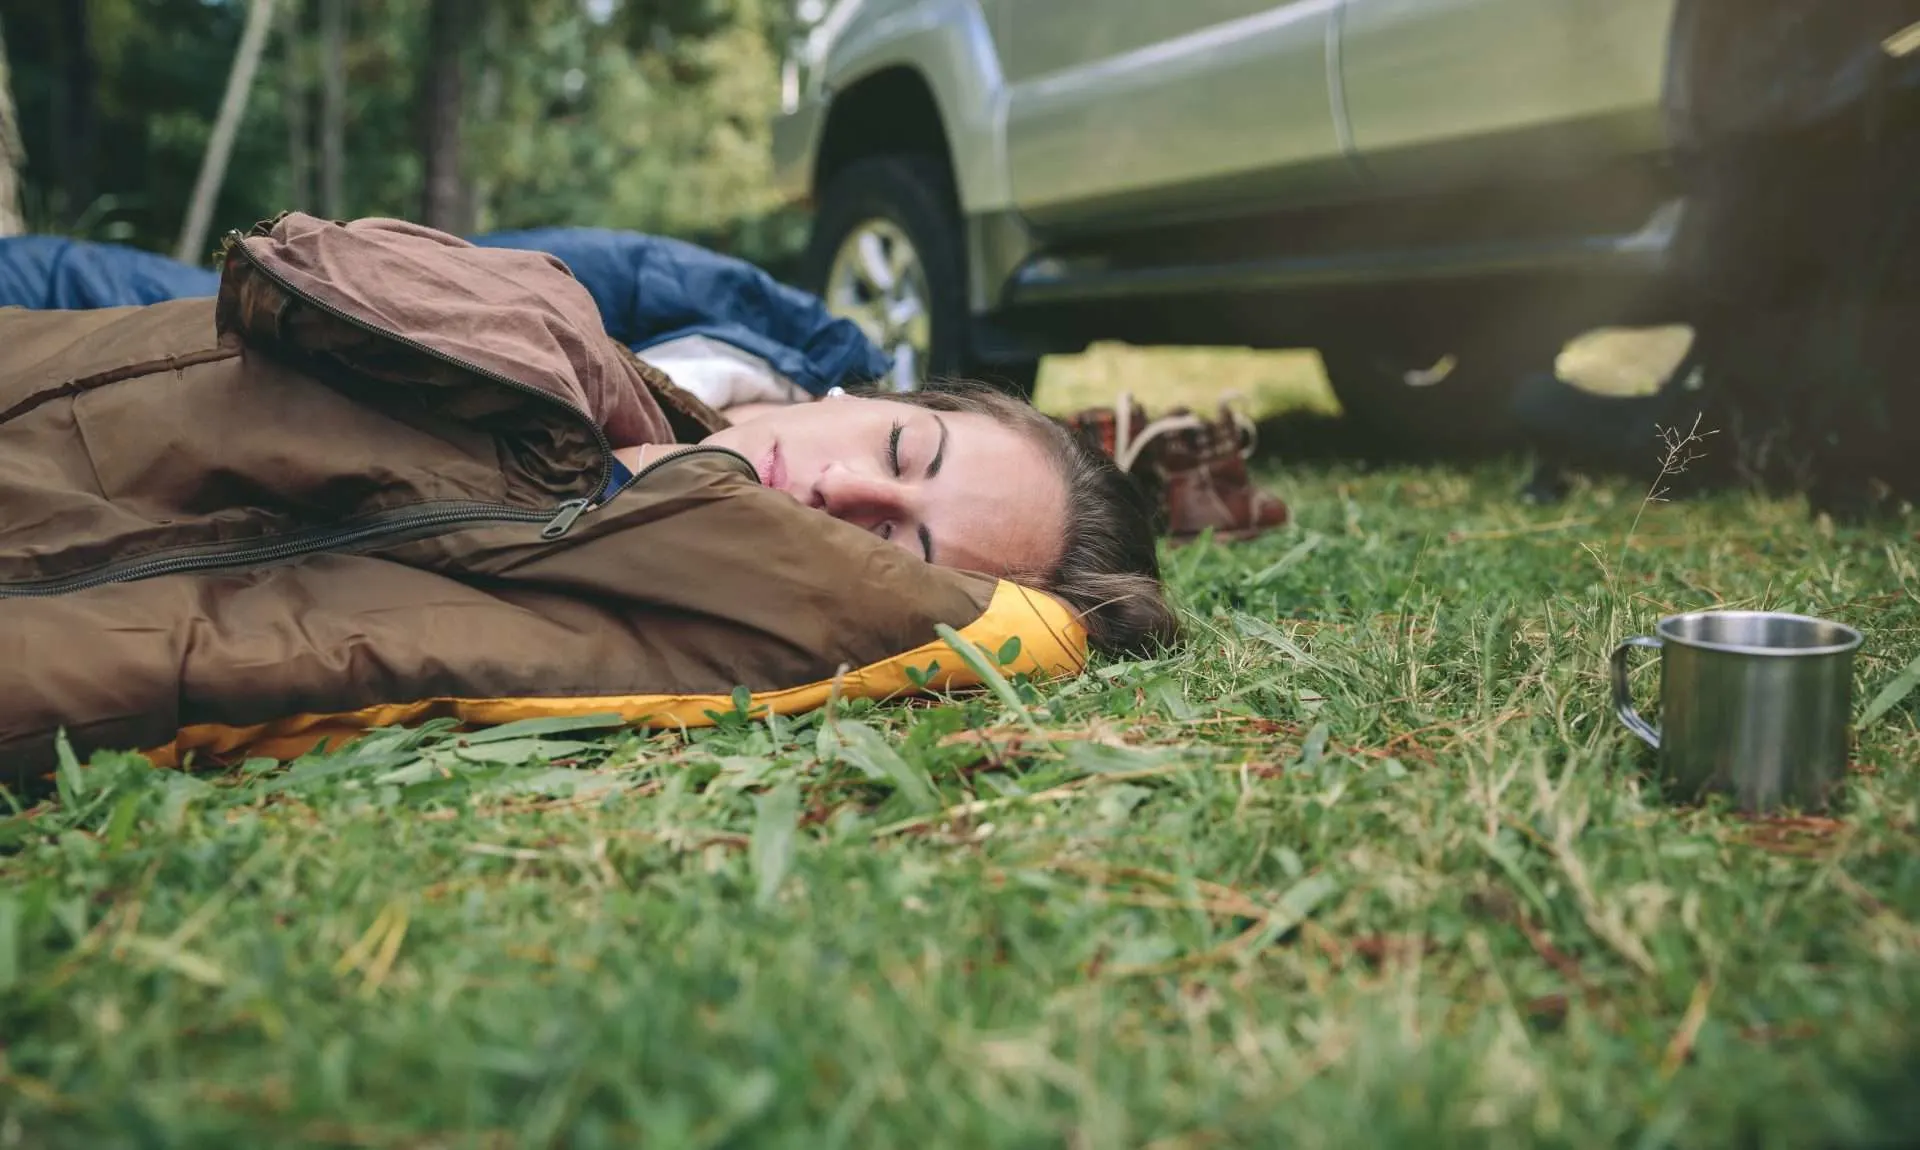 Woman sleeping in sleeping bag without sleeping pad while camping